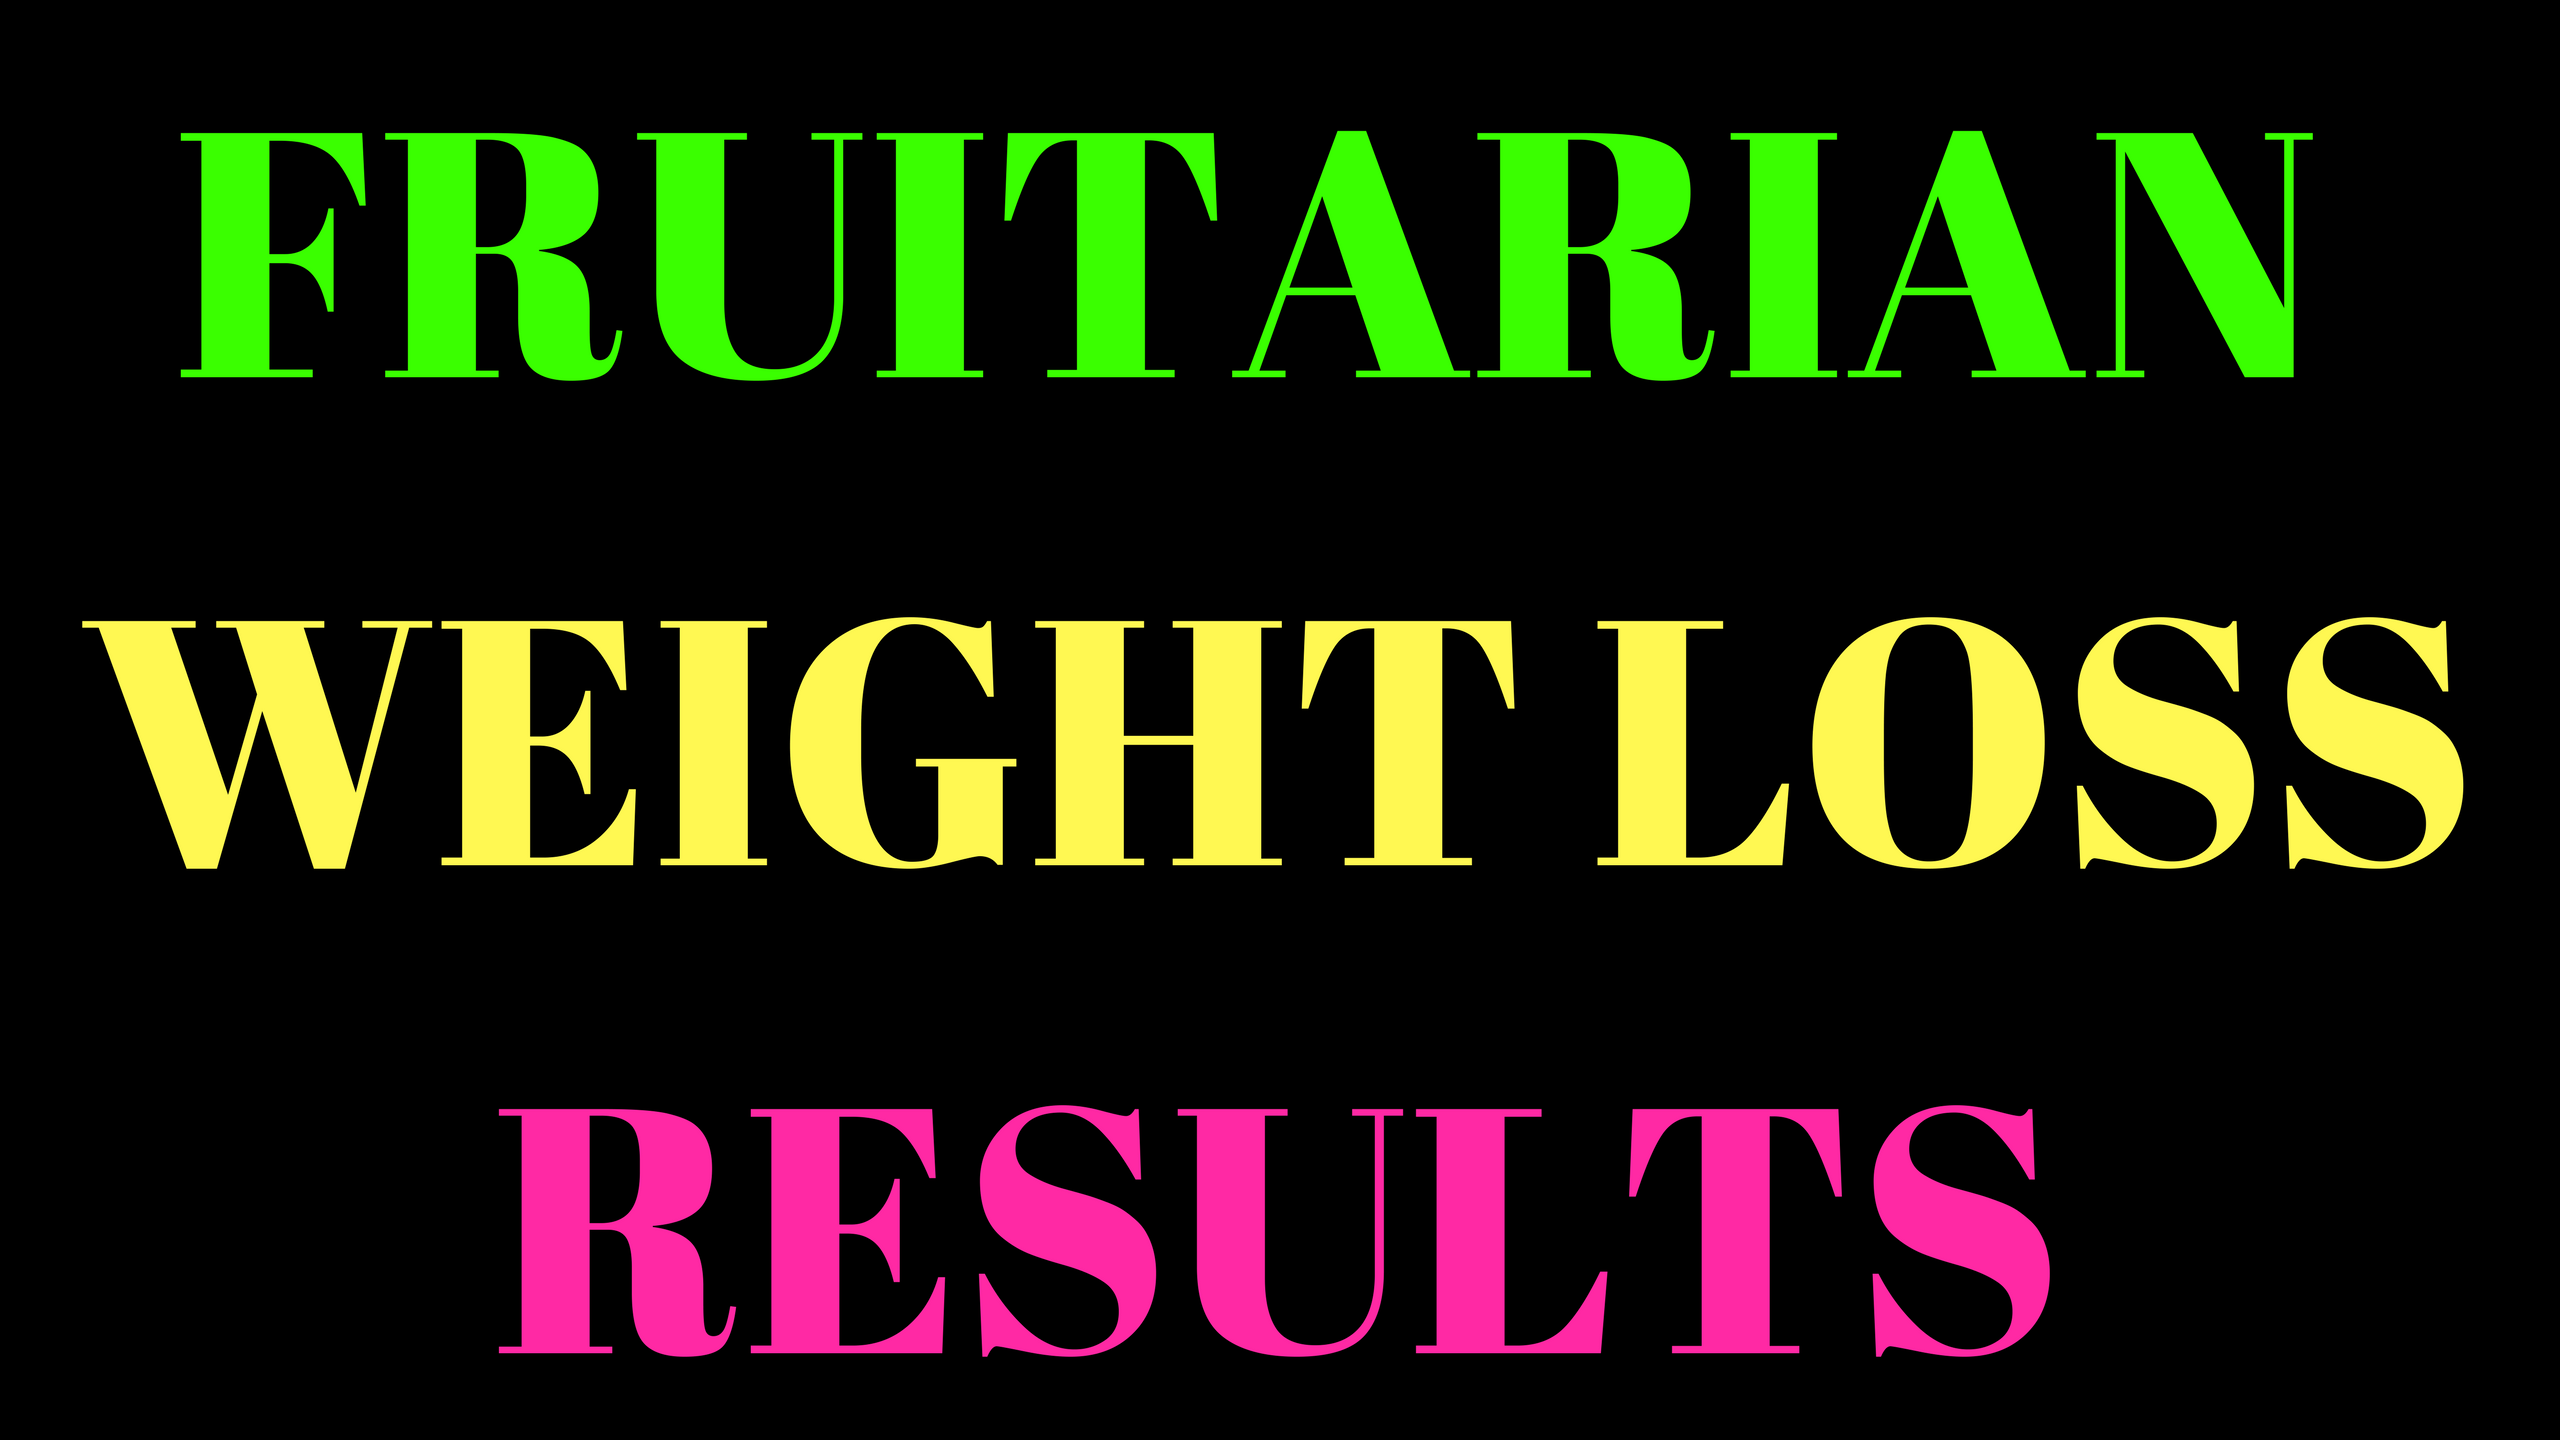 Fruitarian bodybuilding and fruitarianism for weight loss are such a clear ...